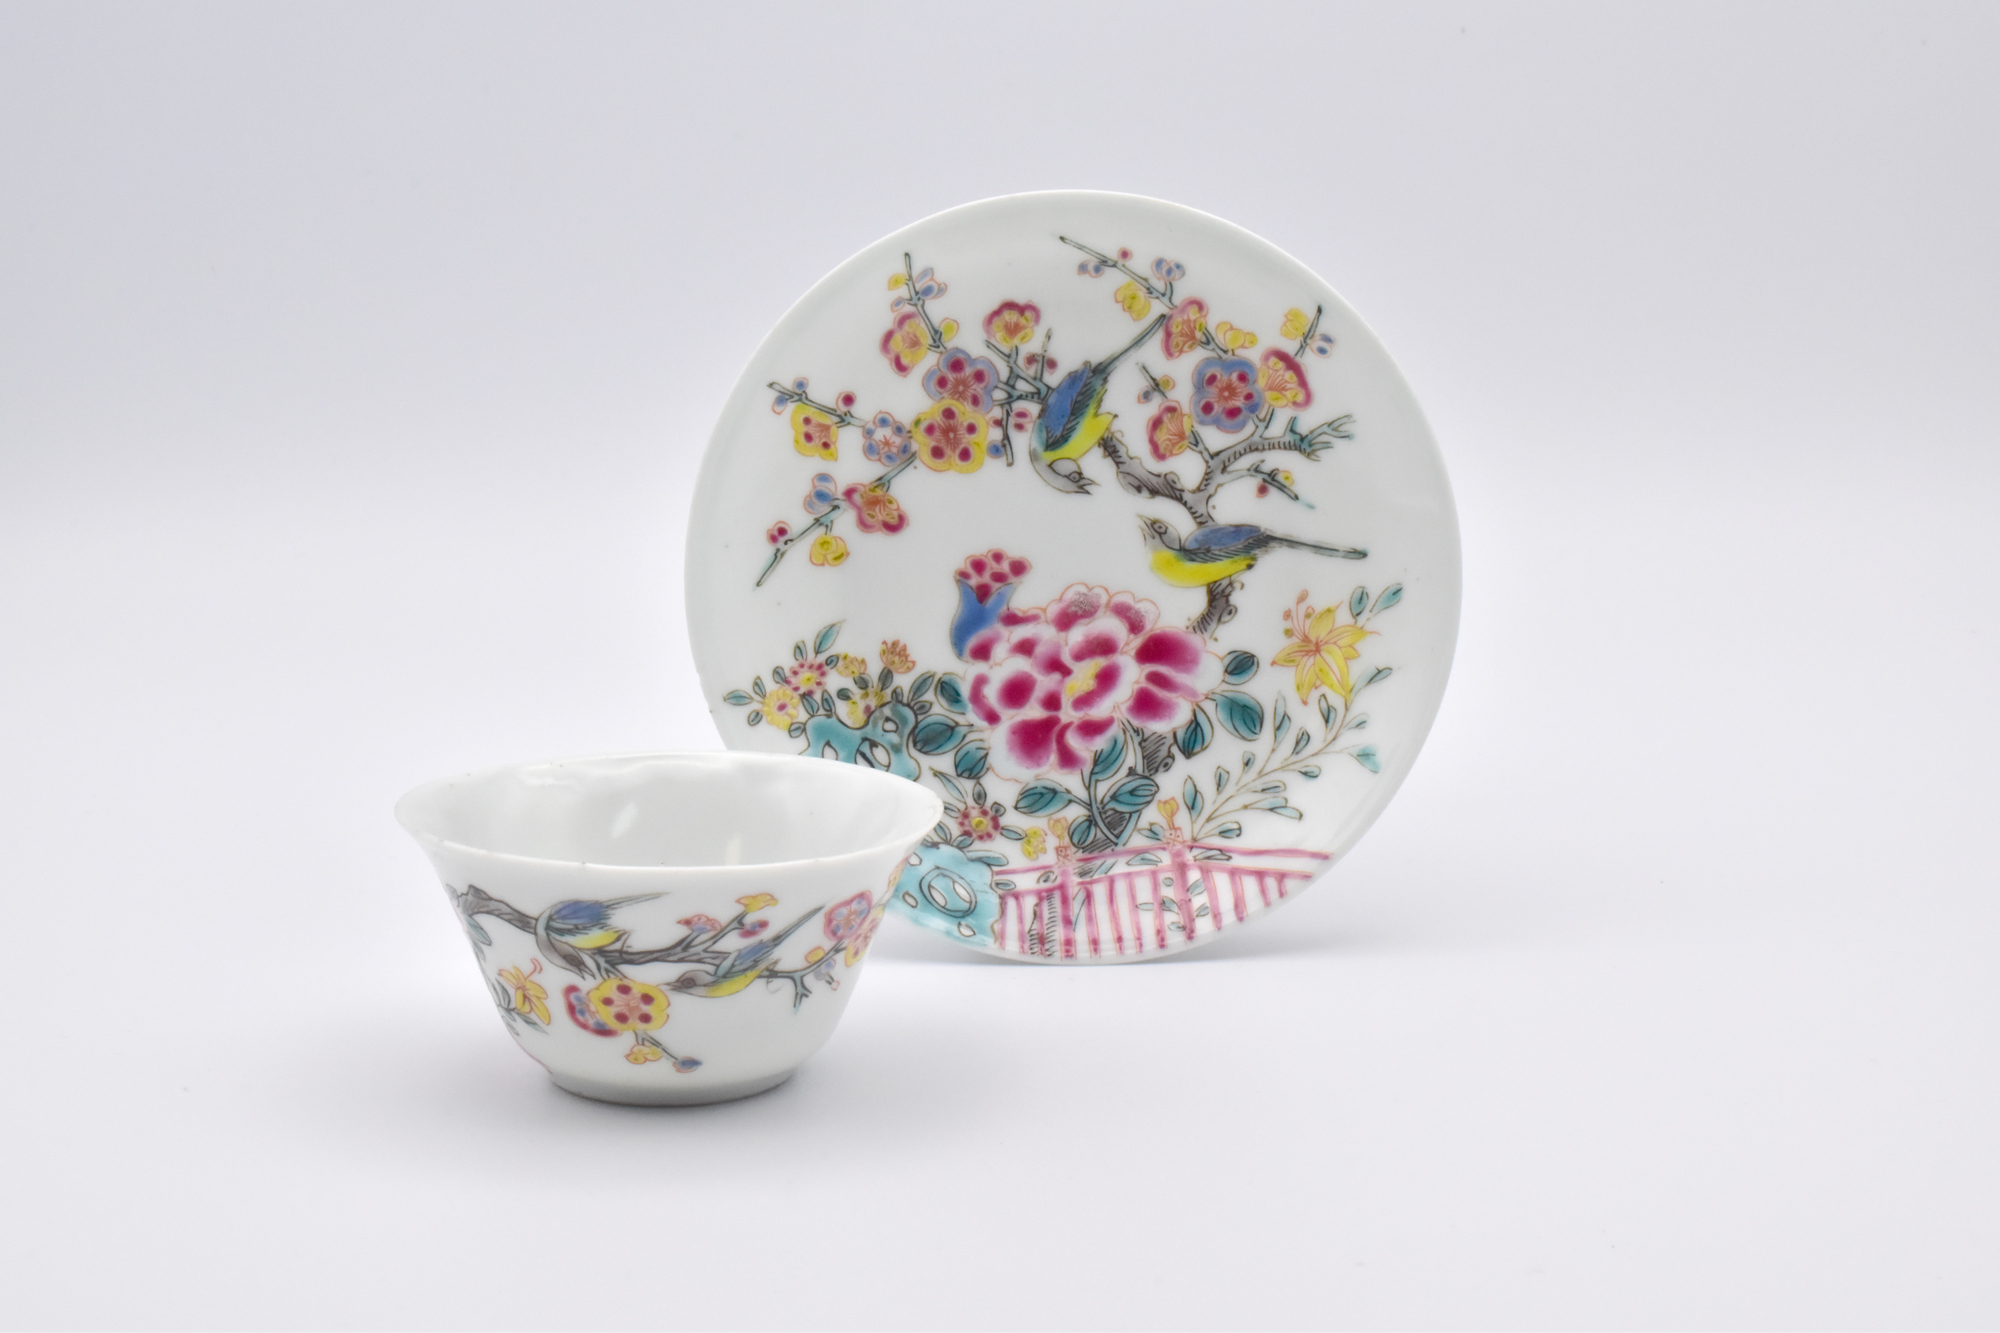 A CHINESE ‘FAMILLE-ROSE’ PORCELAIN TEABOWL AND SAUCER, QING DYNASTY, YONGZHENG PERIOD, 1723 – 1735